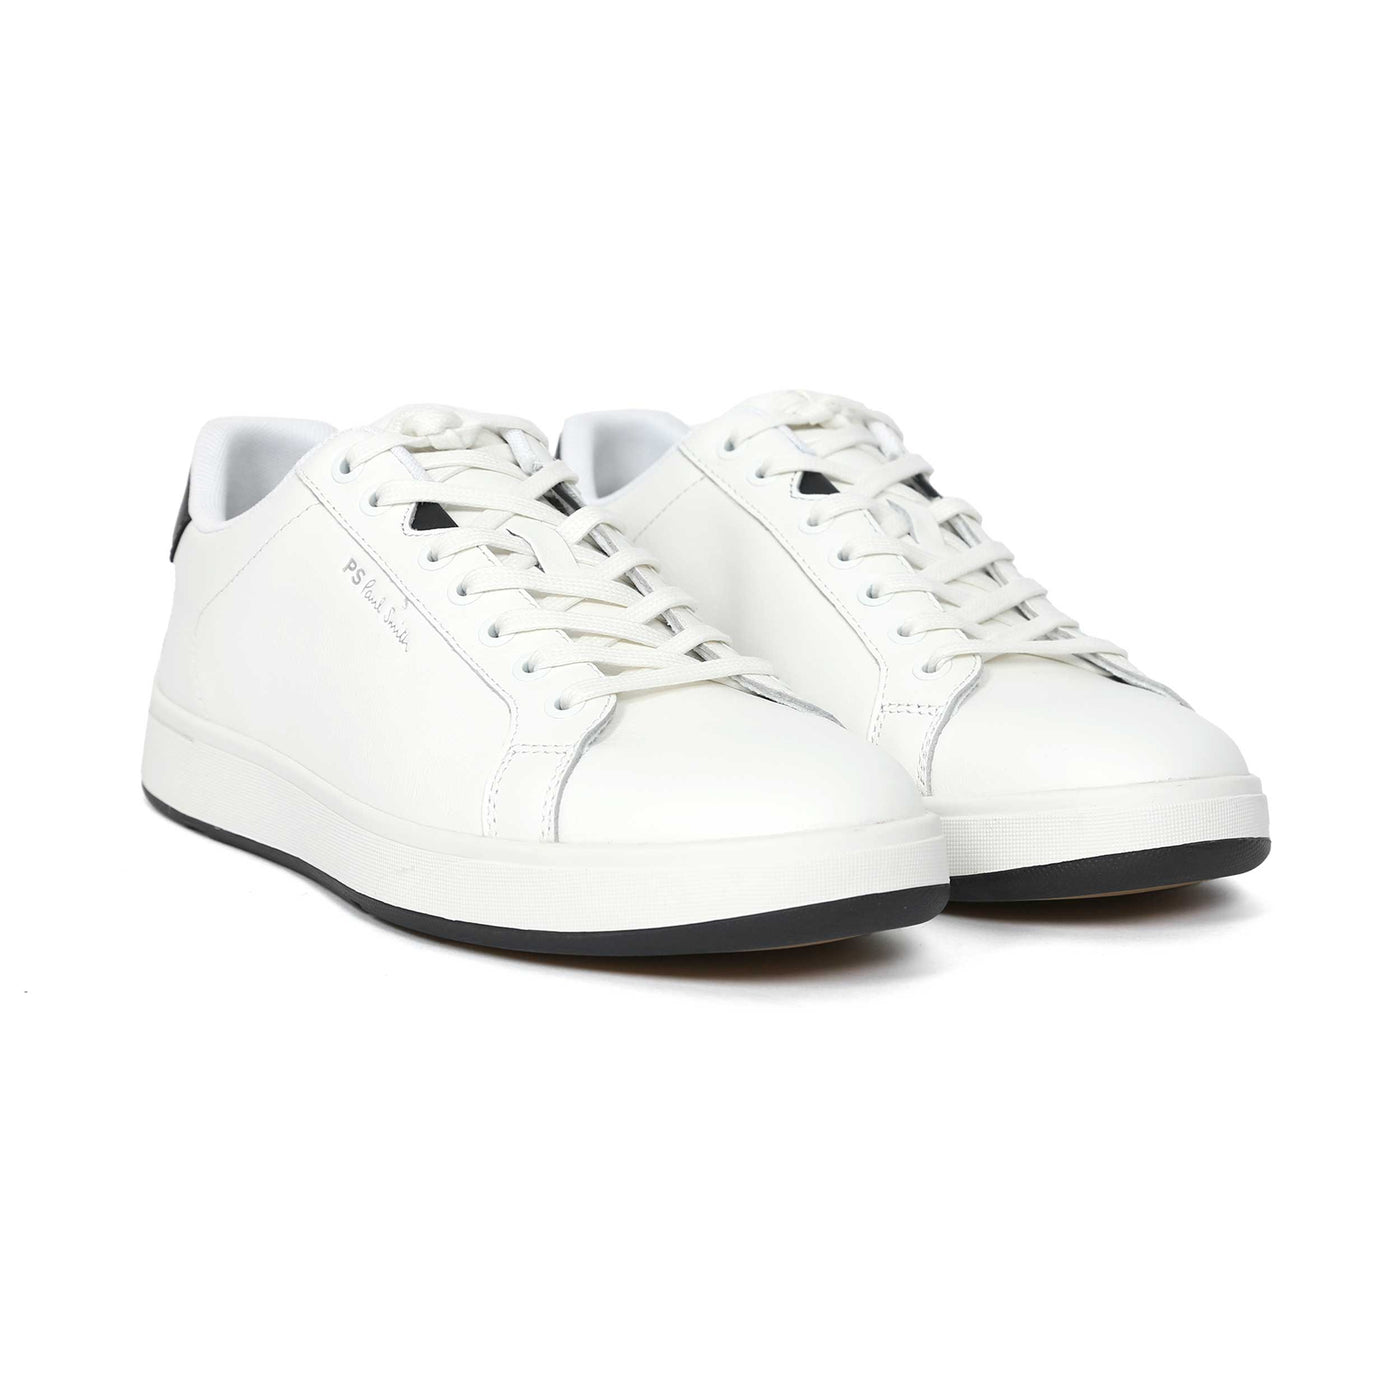 Paul Smith Albany Trainer in White Pair